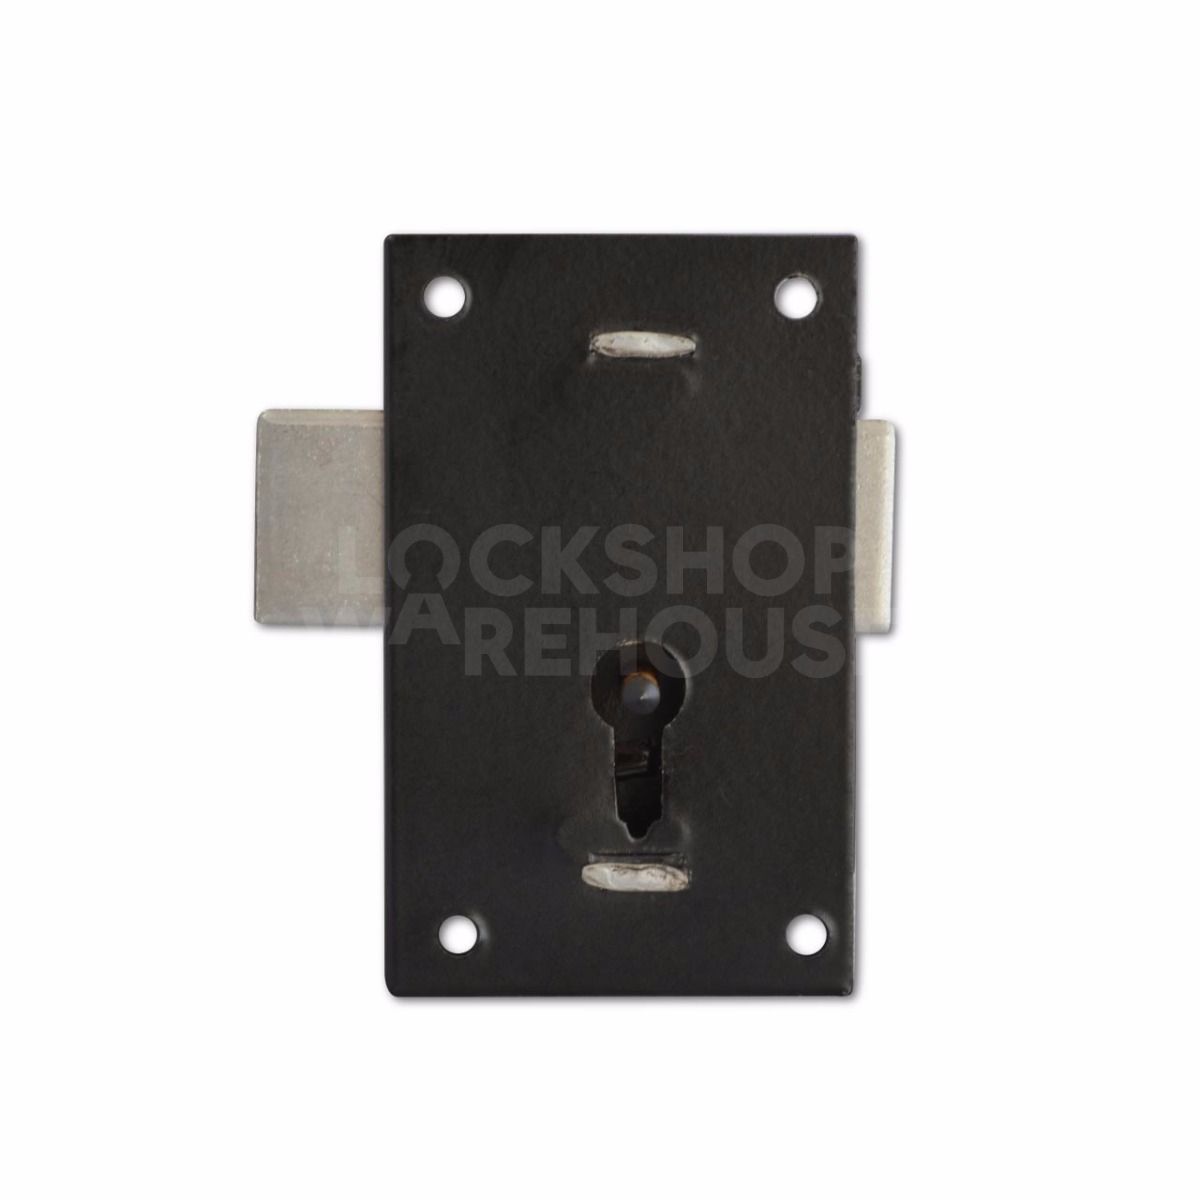 ASEC 1 lever Straight Cupboard Lock Narrow Style